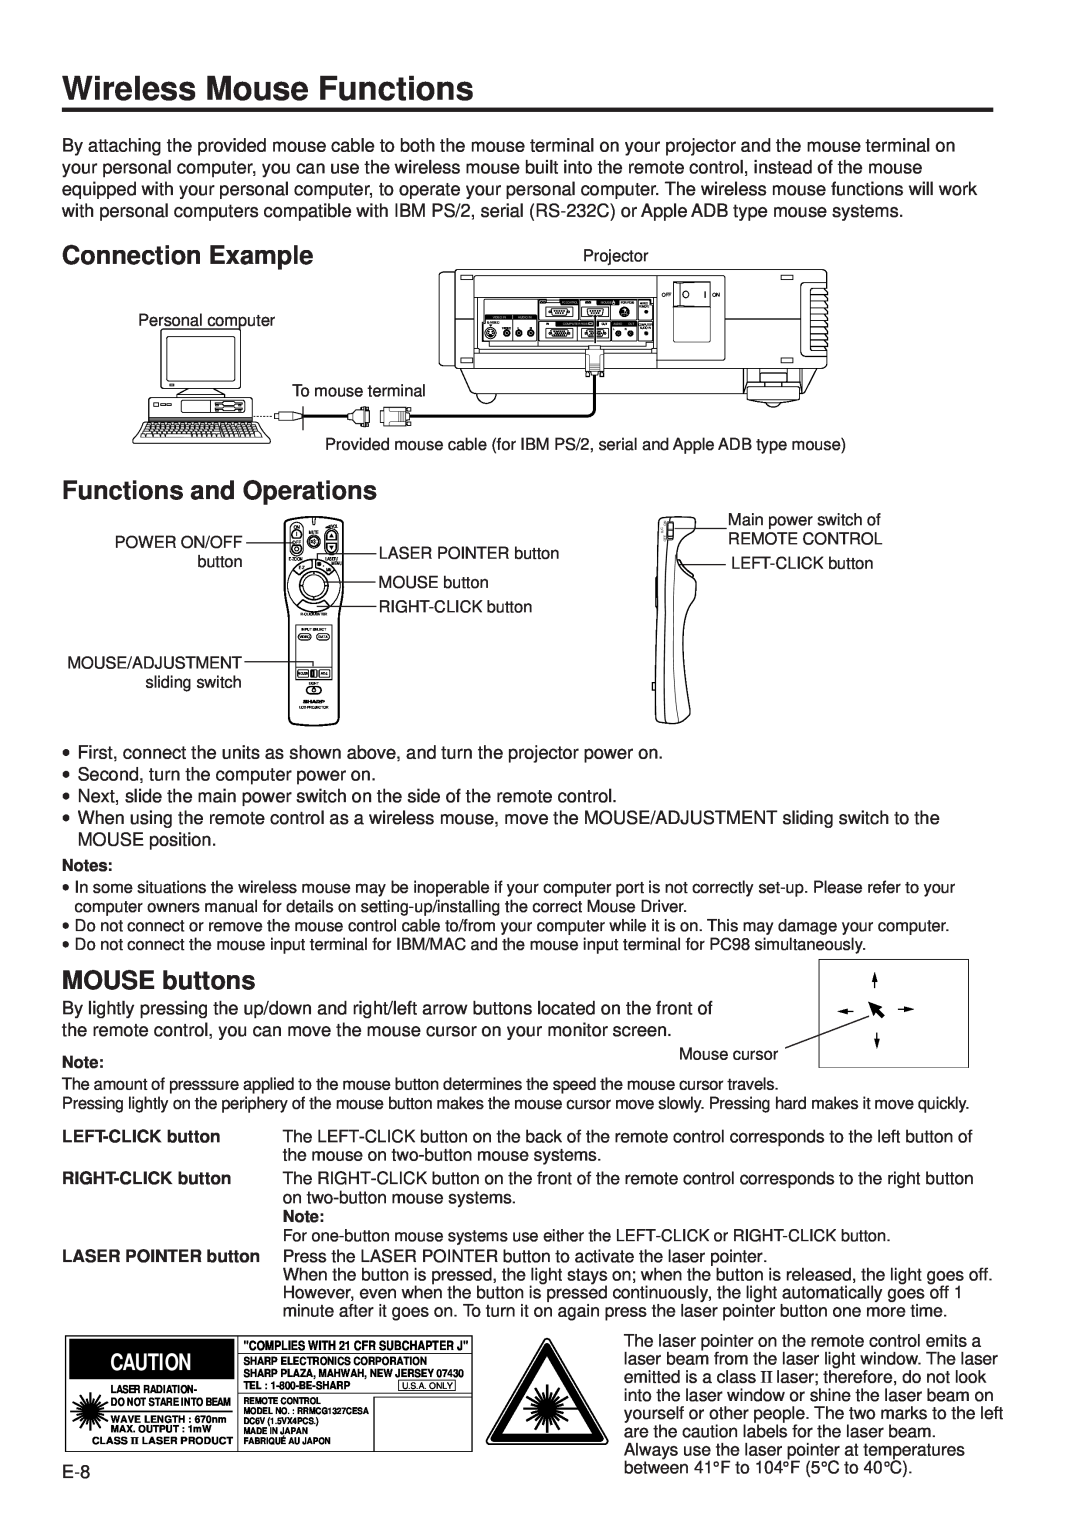 Sharp PG-D100U operation manual Wireless Mouse Functions, Connection Example, Functions and Operations, MOUSE buttons 